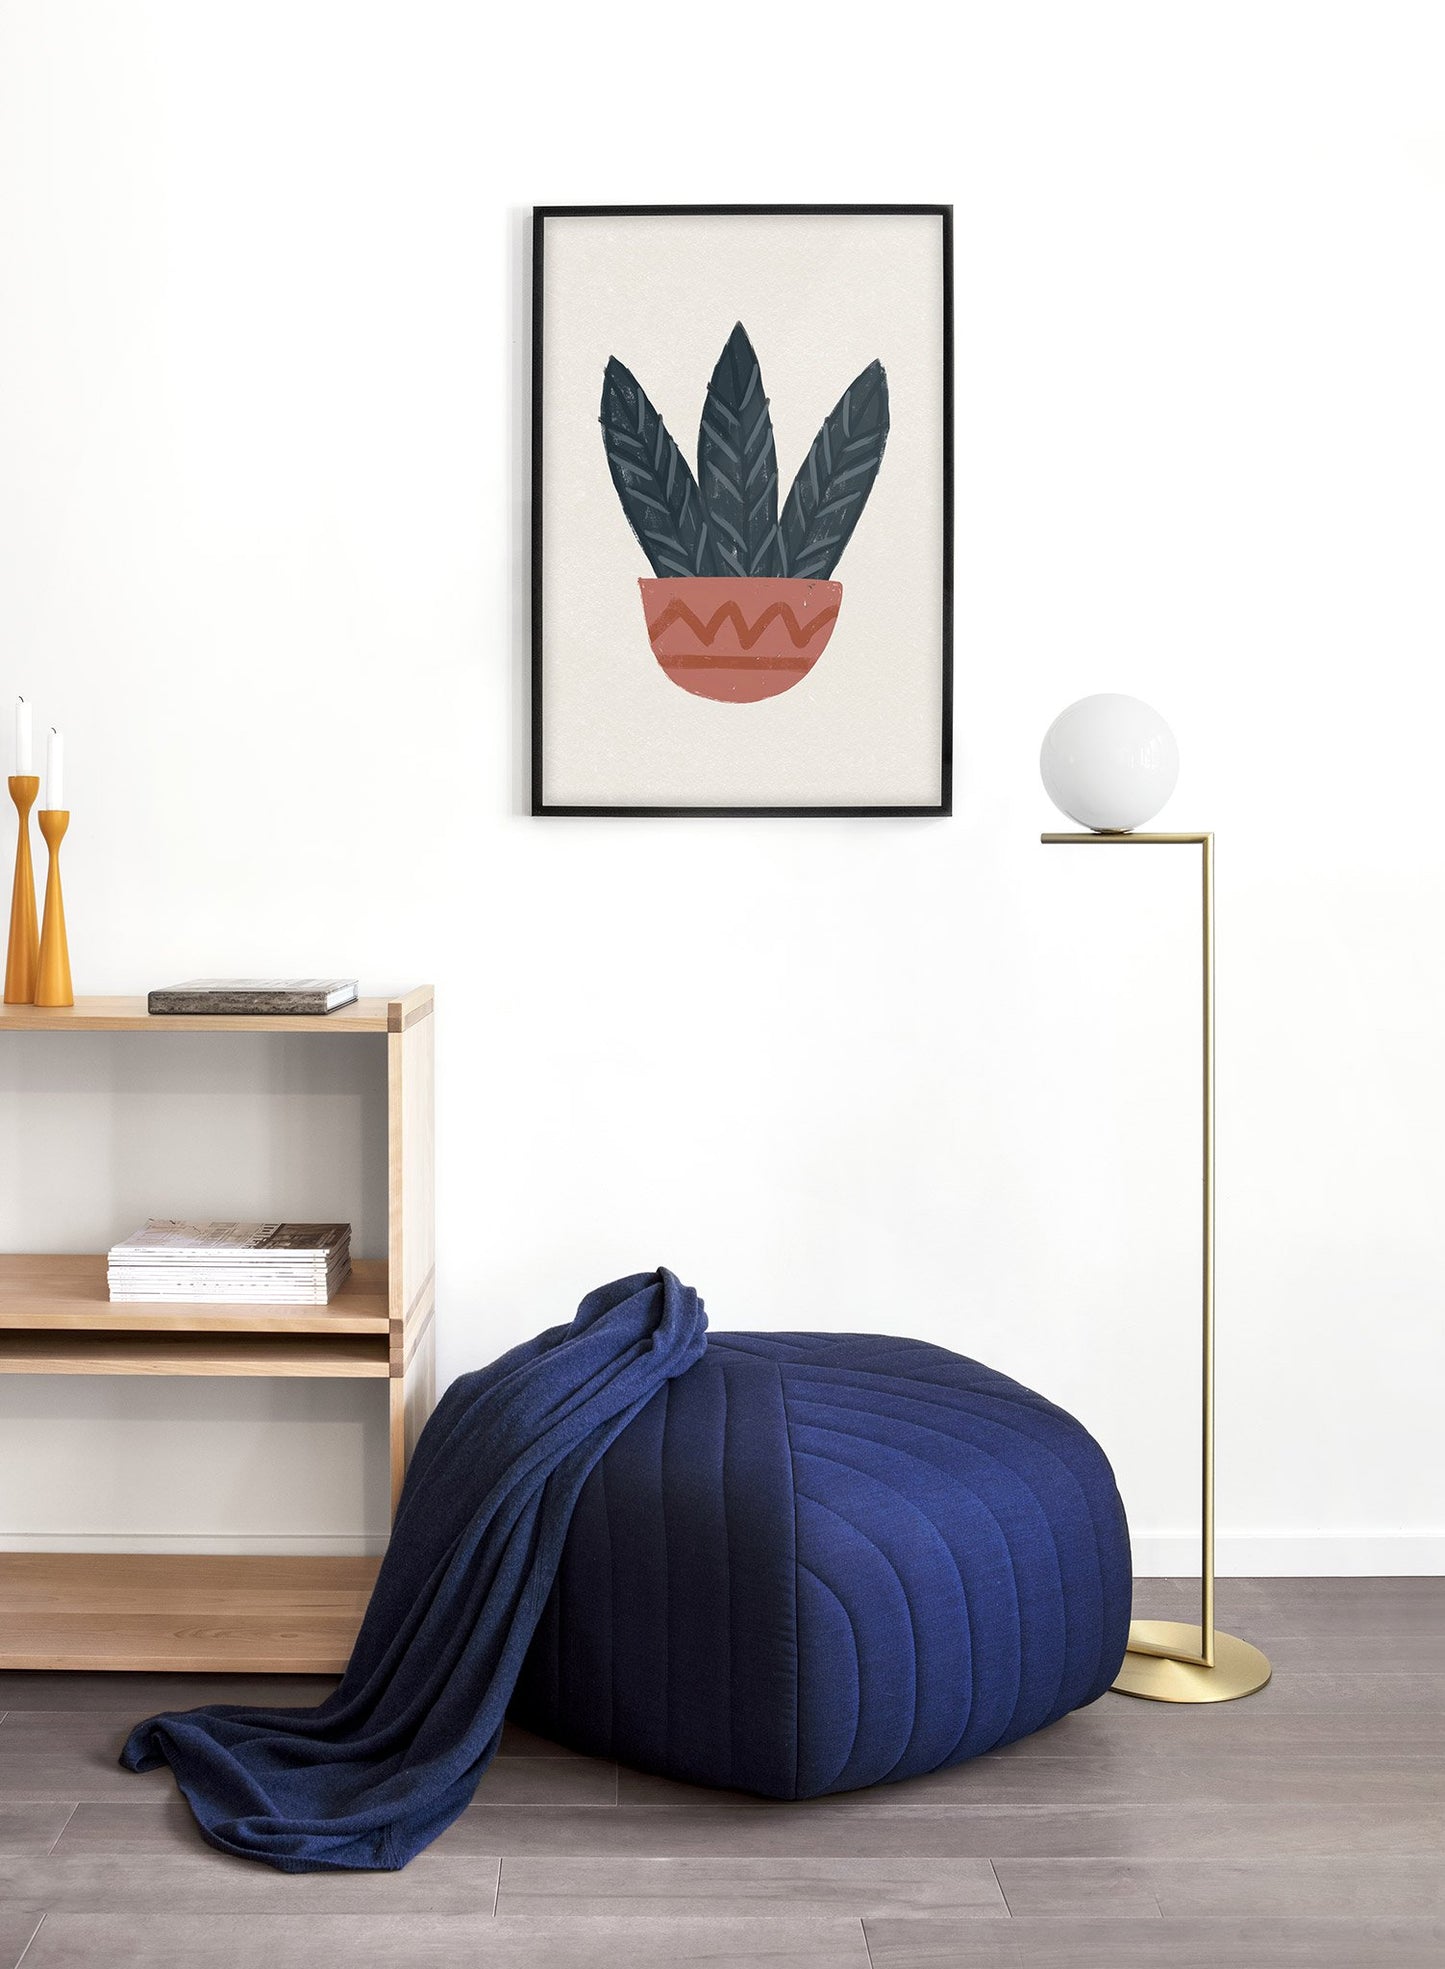 Modern minimalist illustration poster by Opposite Wall with terracotta planter and leaves - Lifestyle - Living Room